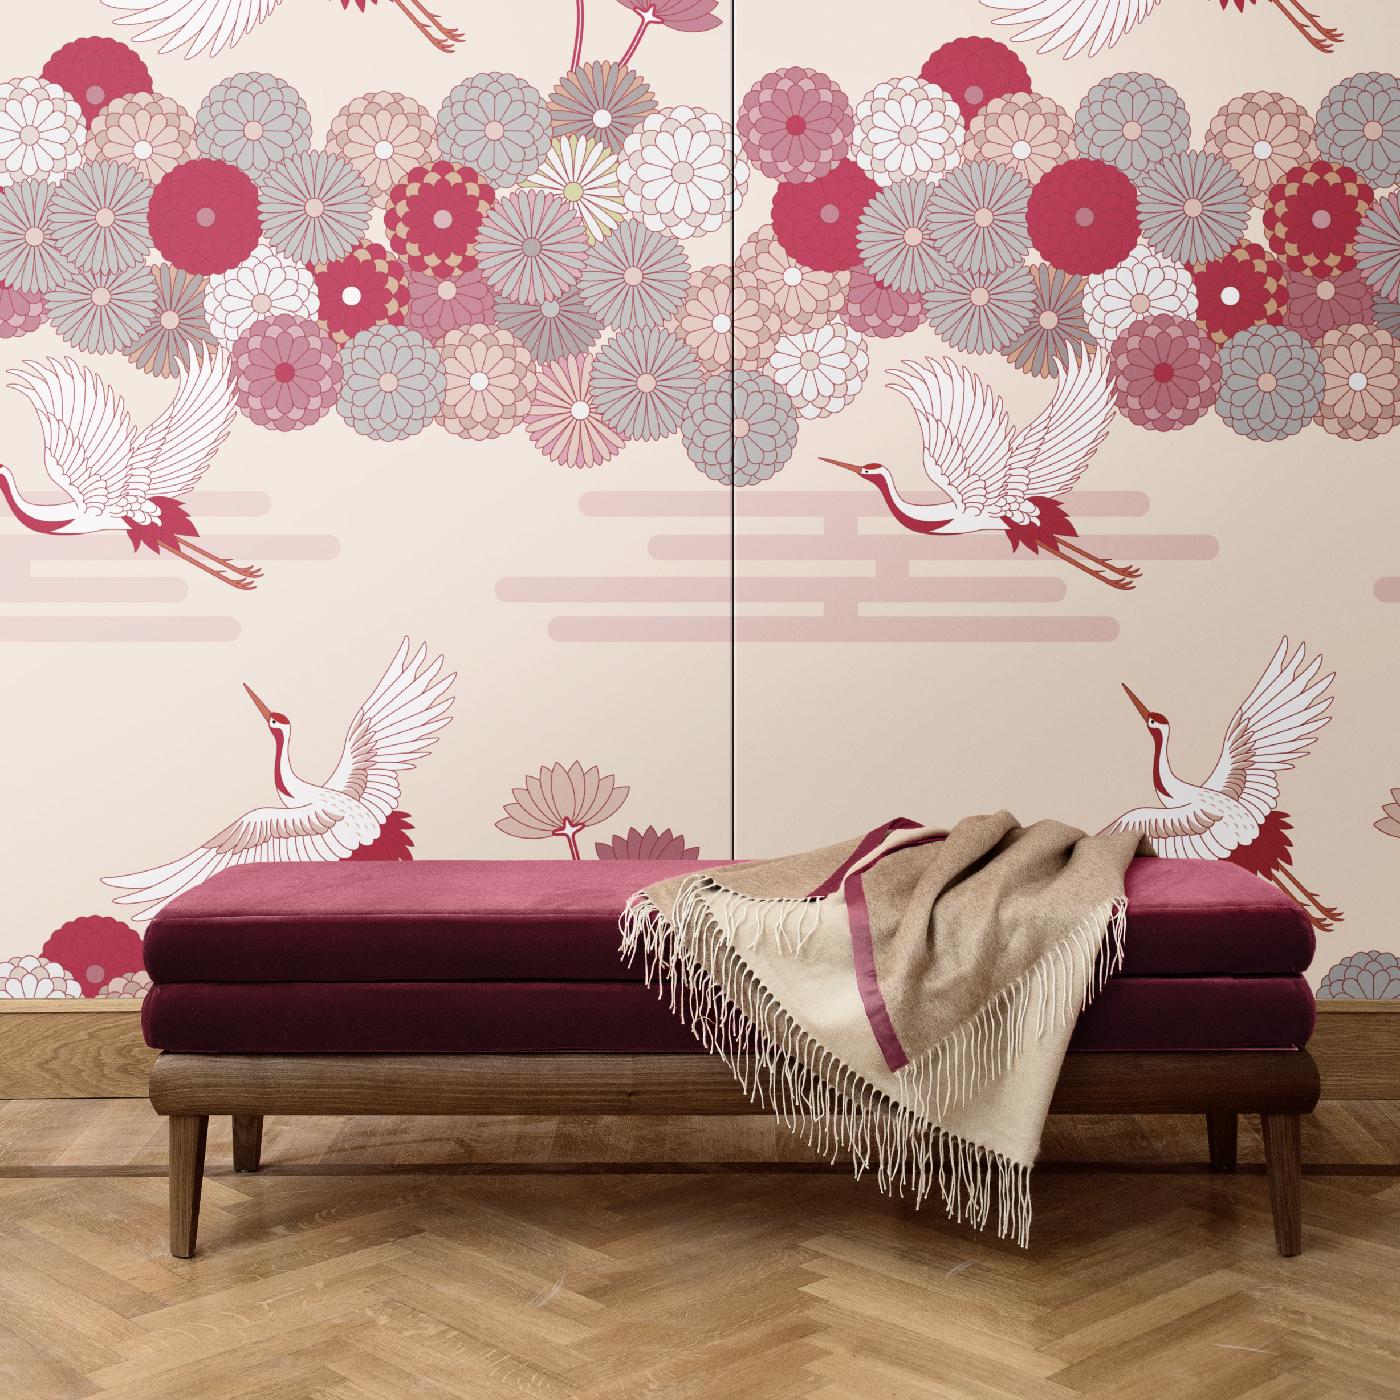 A delicate wall decoration that will imbue of poetic elegance any interior, this is one of five versions of the Flowers and Storks collection. It was crafted of silk and cotton and depicts a scene inspired by Japanese paintings, using different